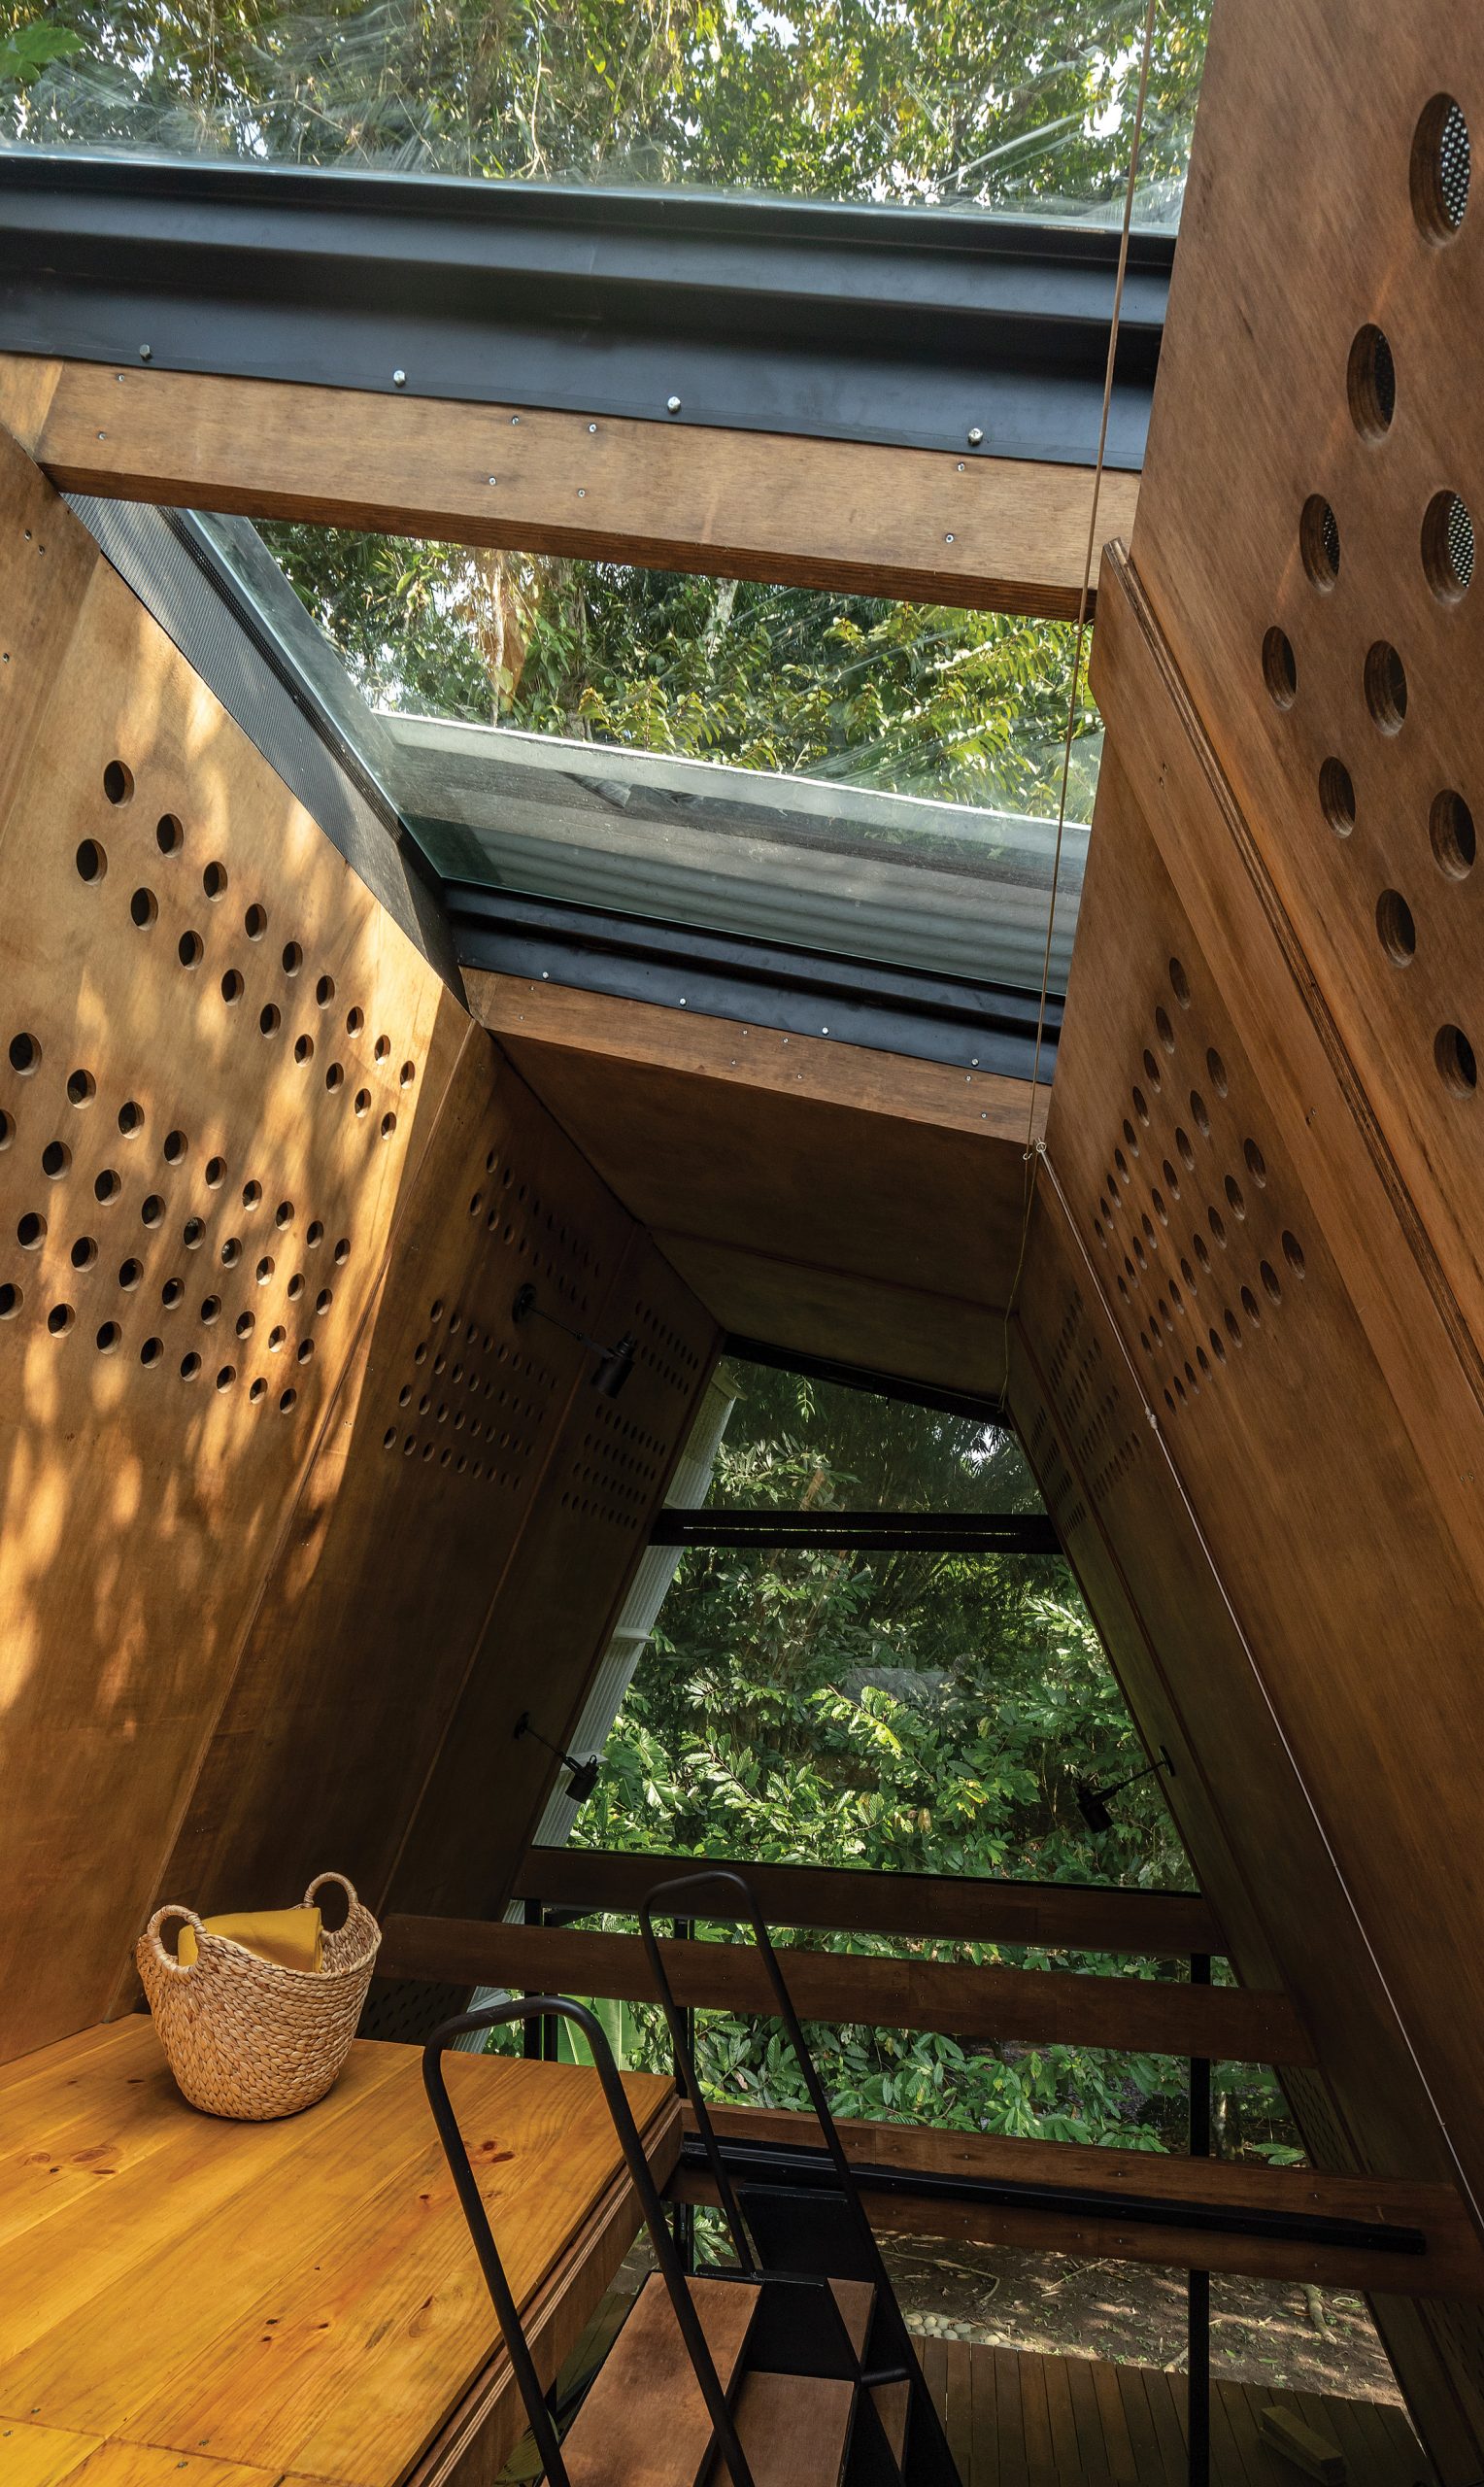 The upper level of the Huaira cabin by Diana Salvador and Javier Mera in Ecuador